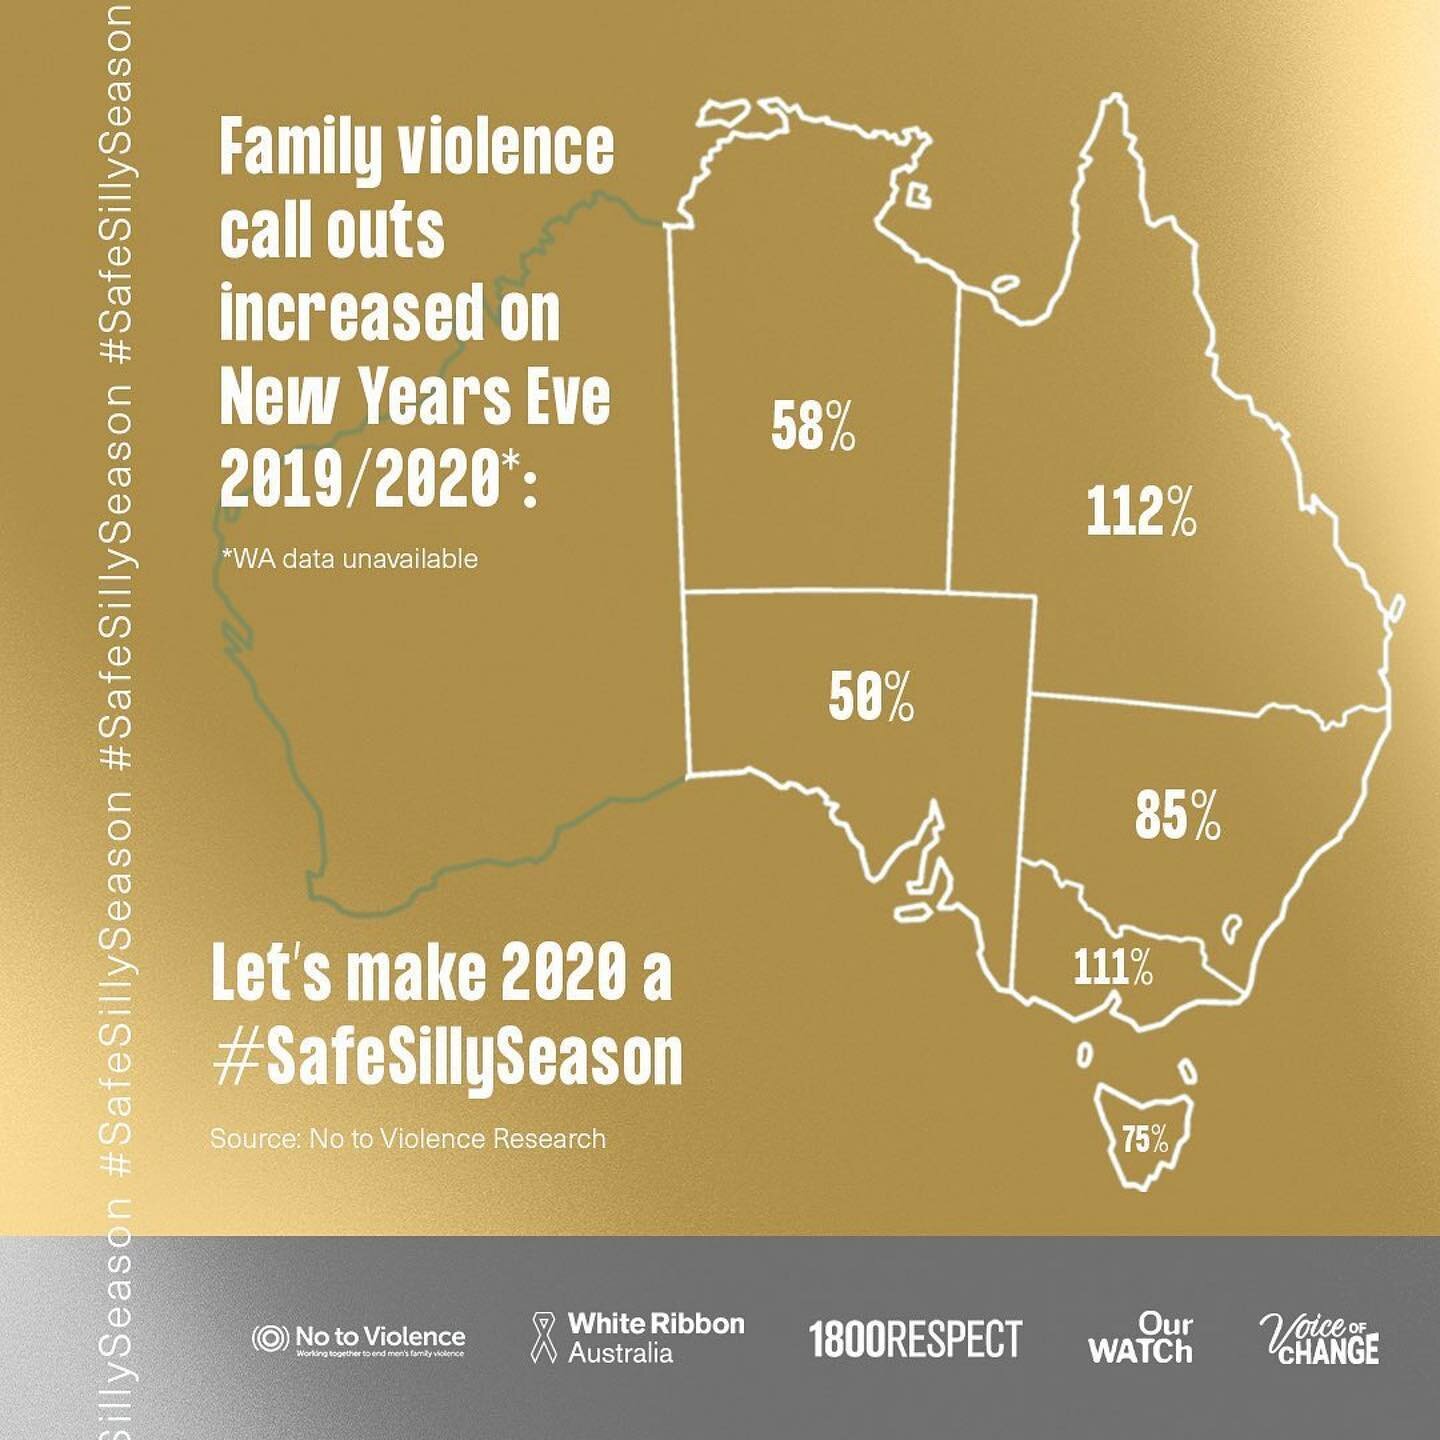 ・・・
New Year's Eve is the most dangerous night of the year for some Australians, with rates of family violence set to skyrocket. Support this important #SafeSillySeason campaign with  #NoToViolence @whiteribbonaust, @ourwatch, @1800respect_australia 